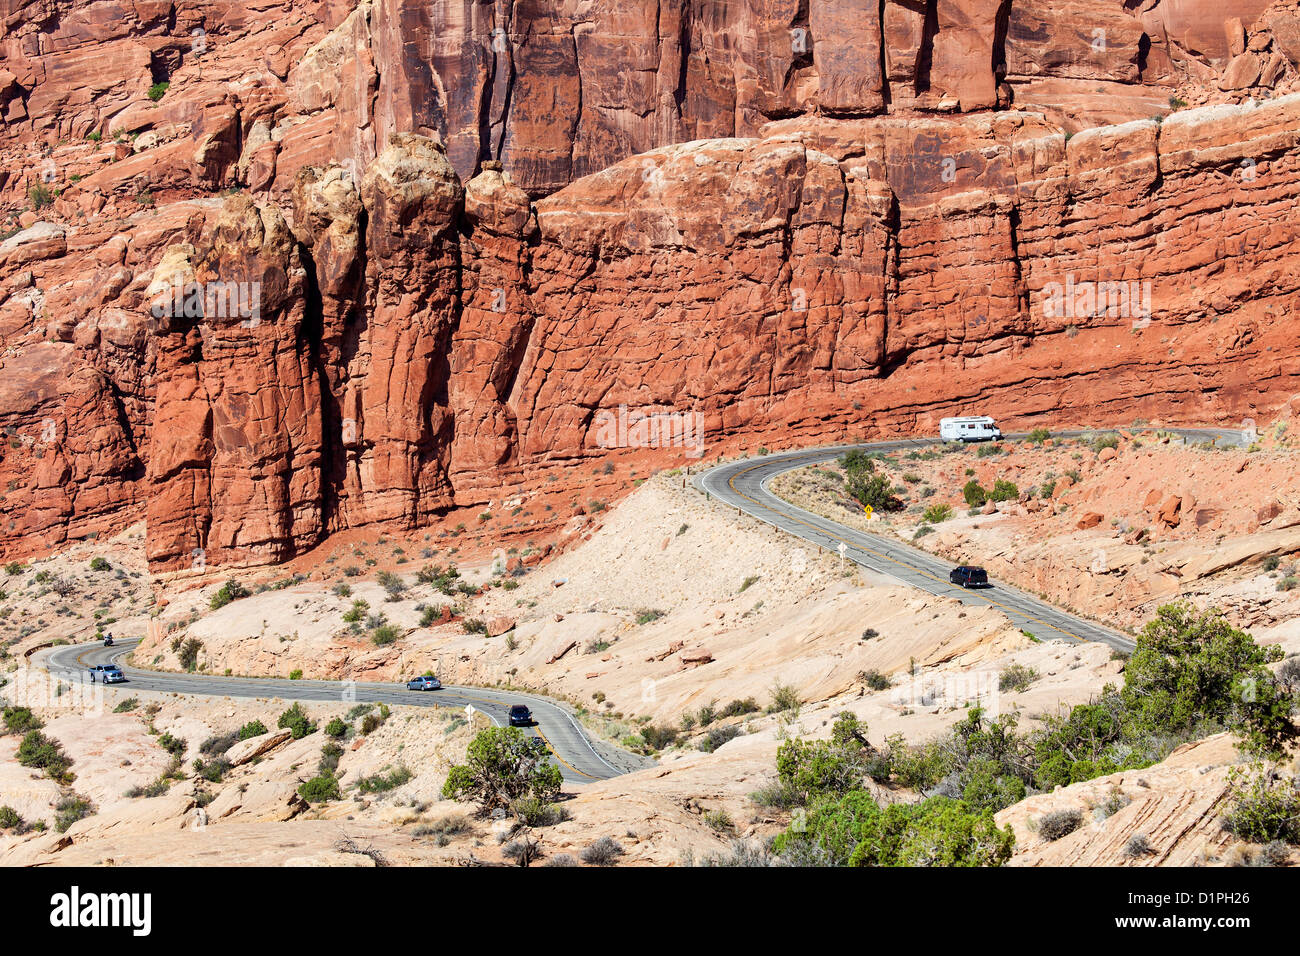 The Road into Arches NP, Utah, USA Stock Photo